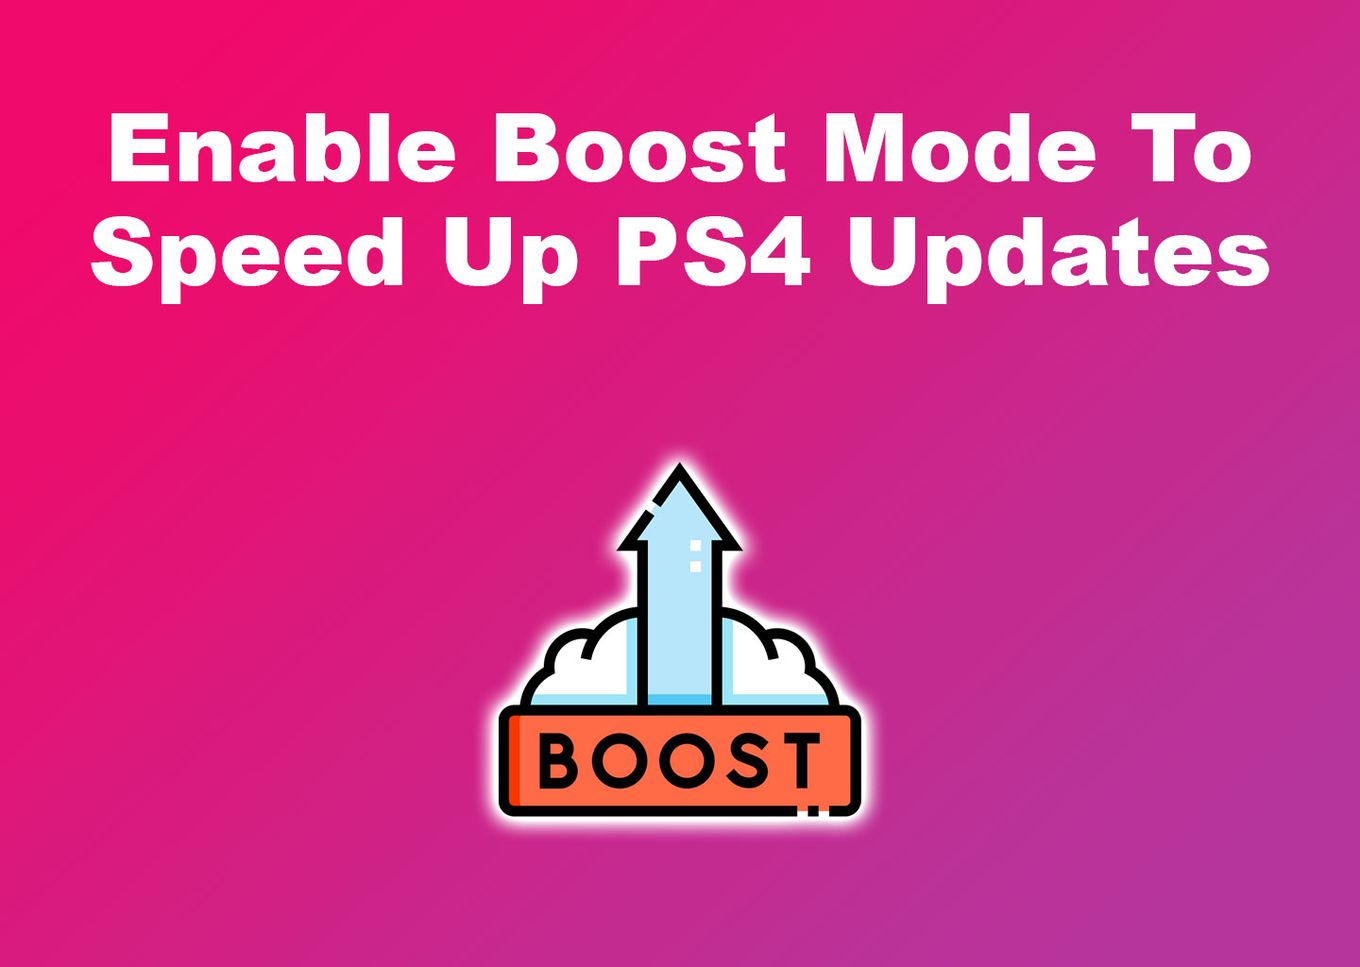 Enable Boost Mode To Speed Up PS4 Updates